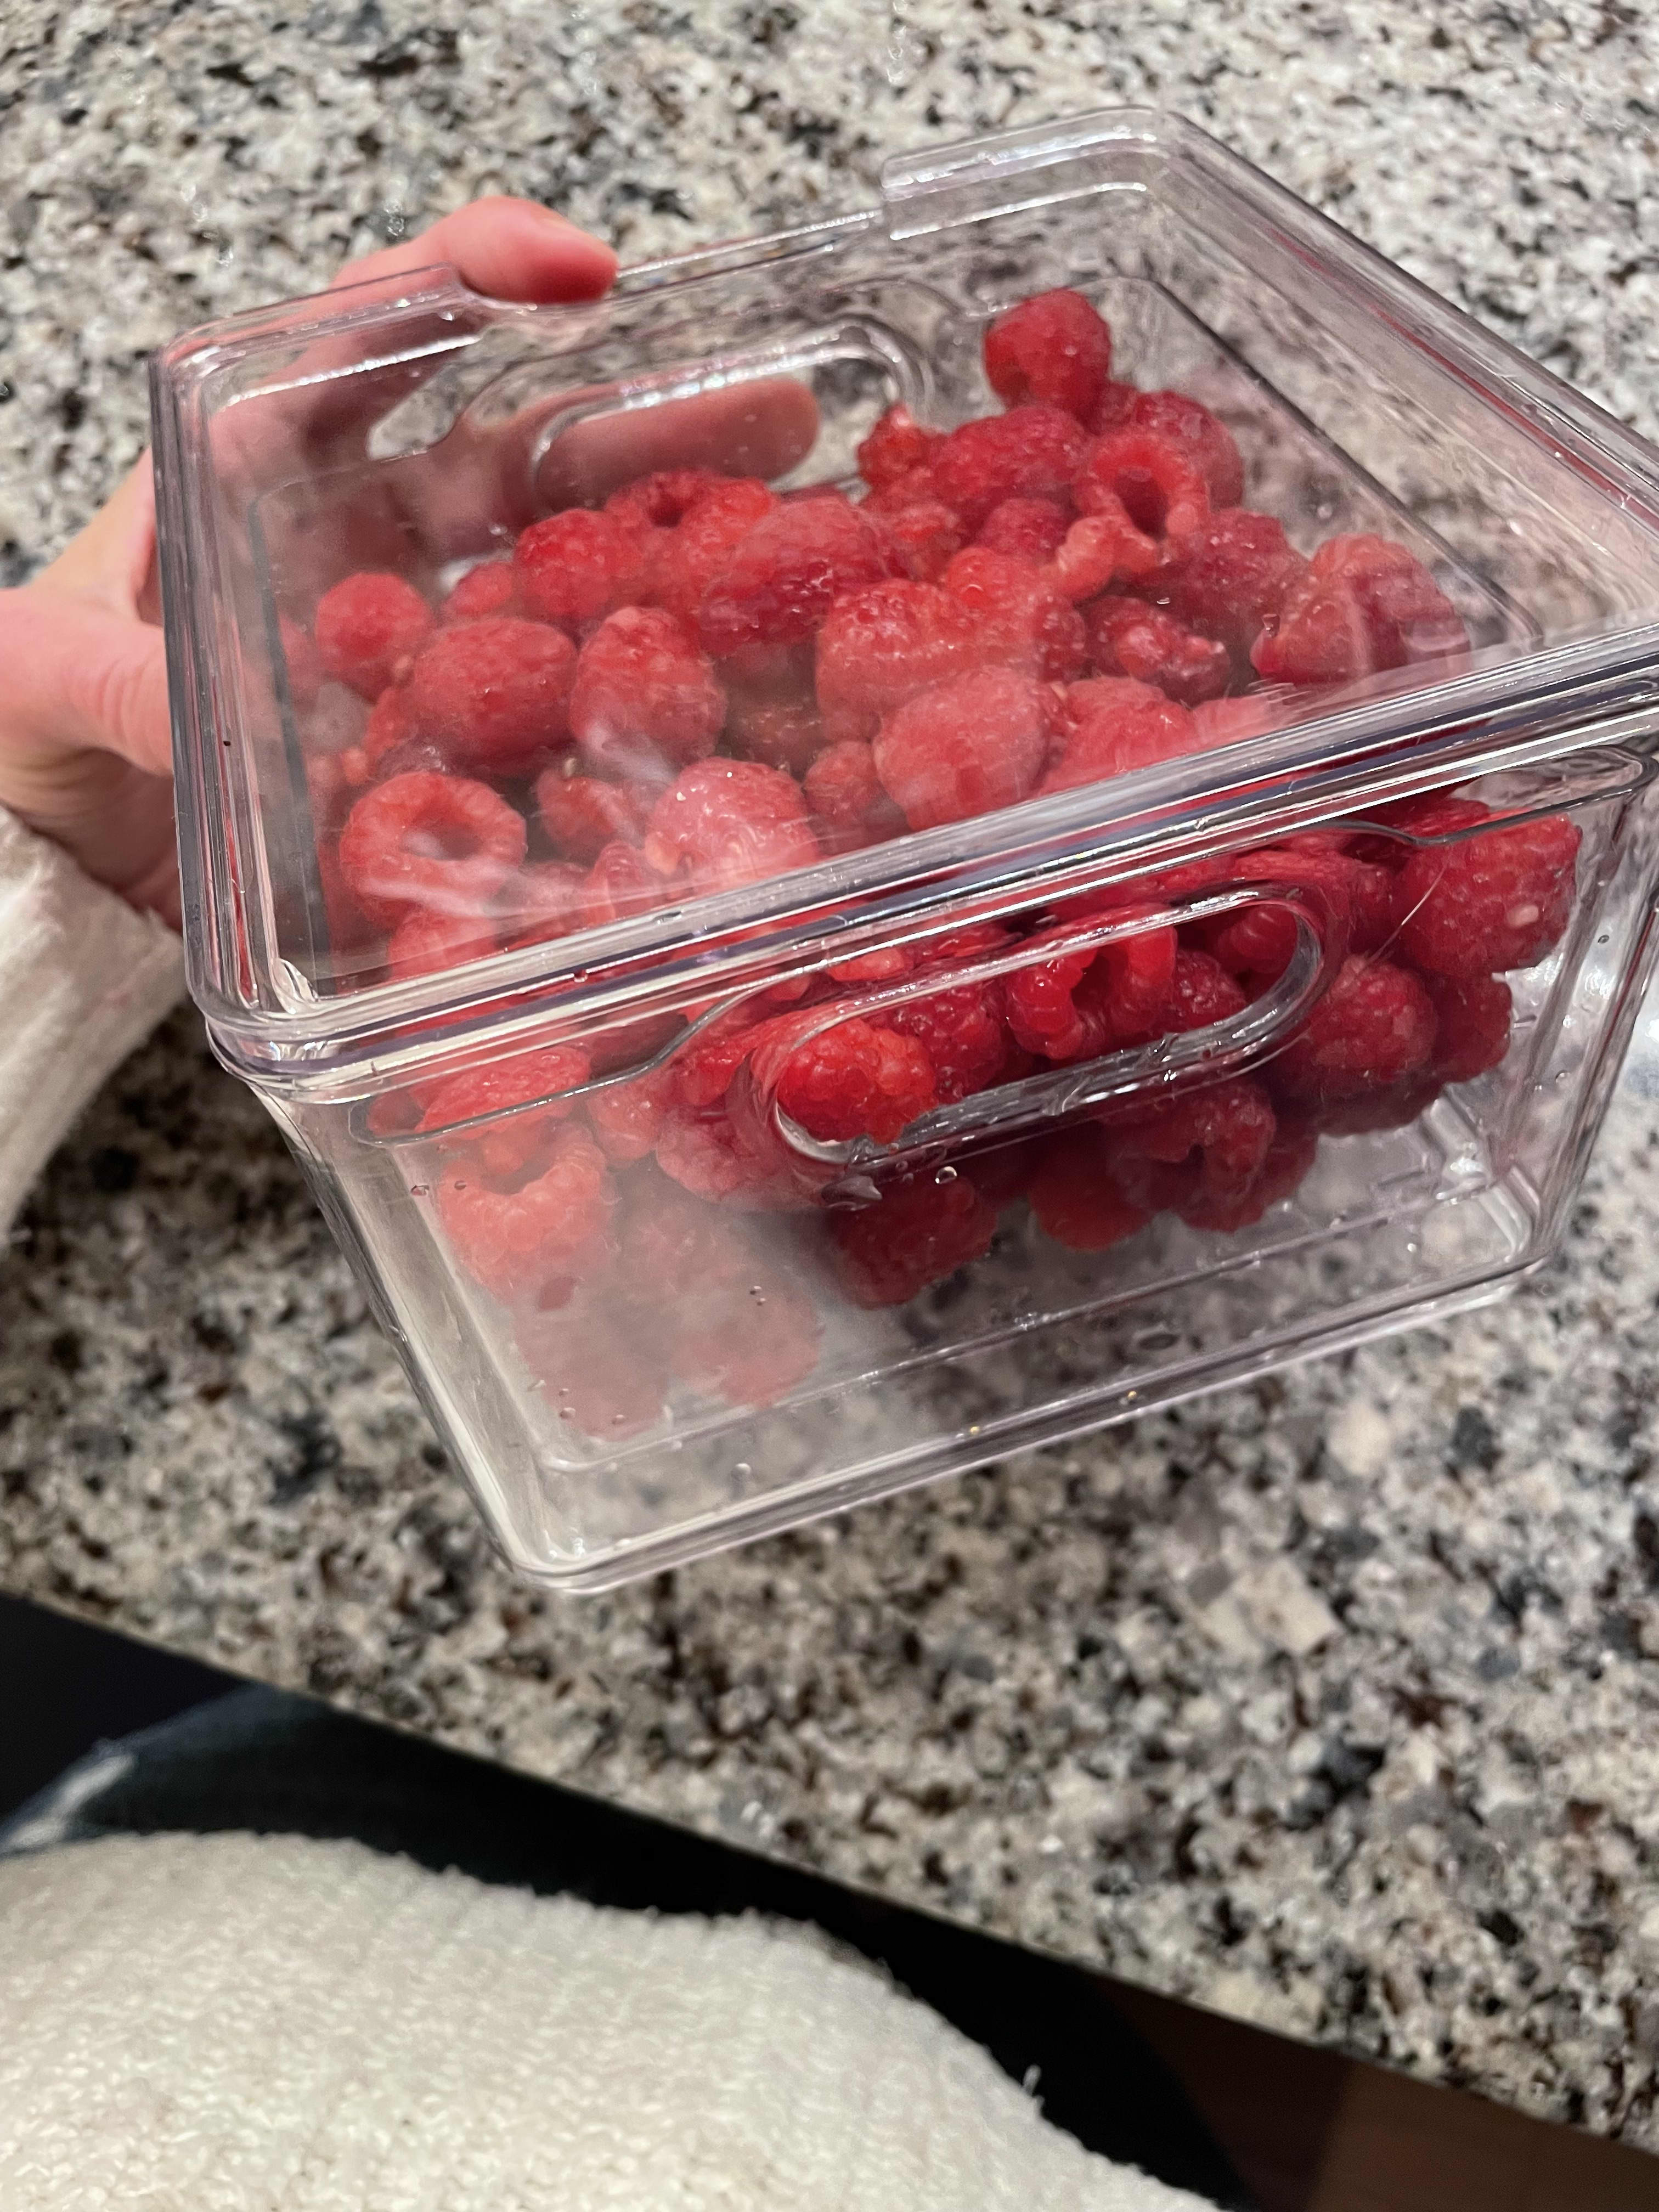 3-in-1 Berry Box Keeps Berries Fresh Longer - Saves Money and Prevents Food  Waste